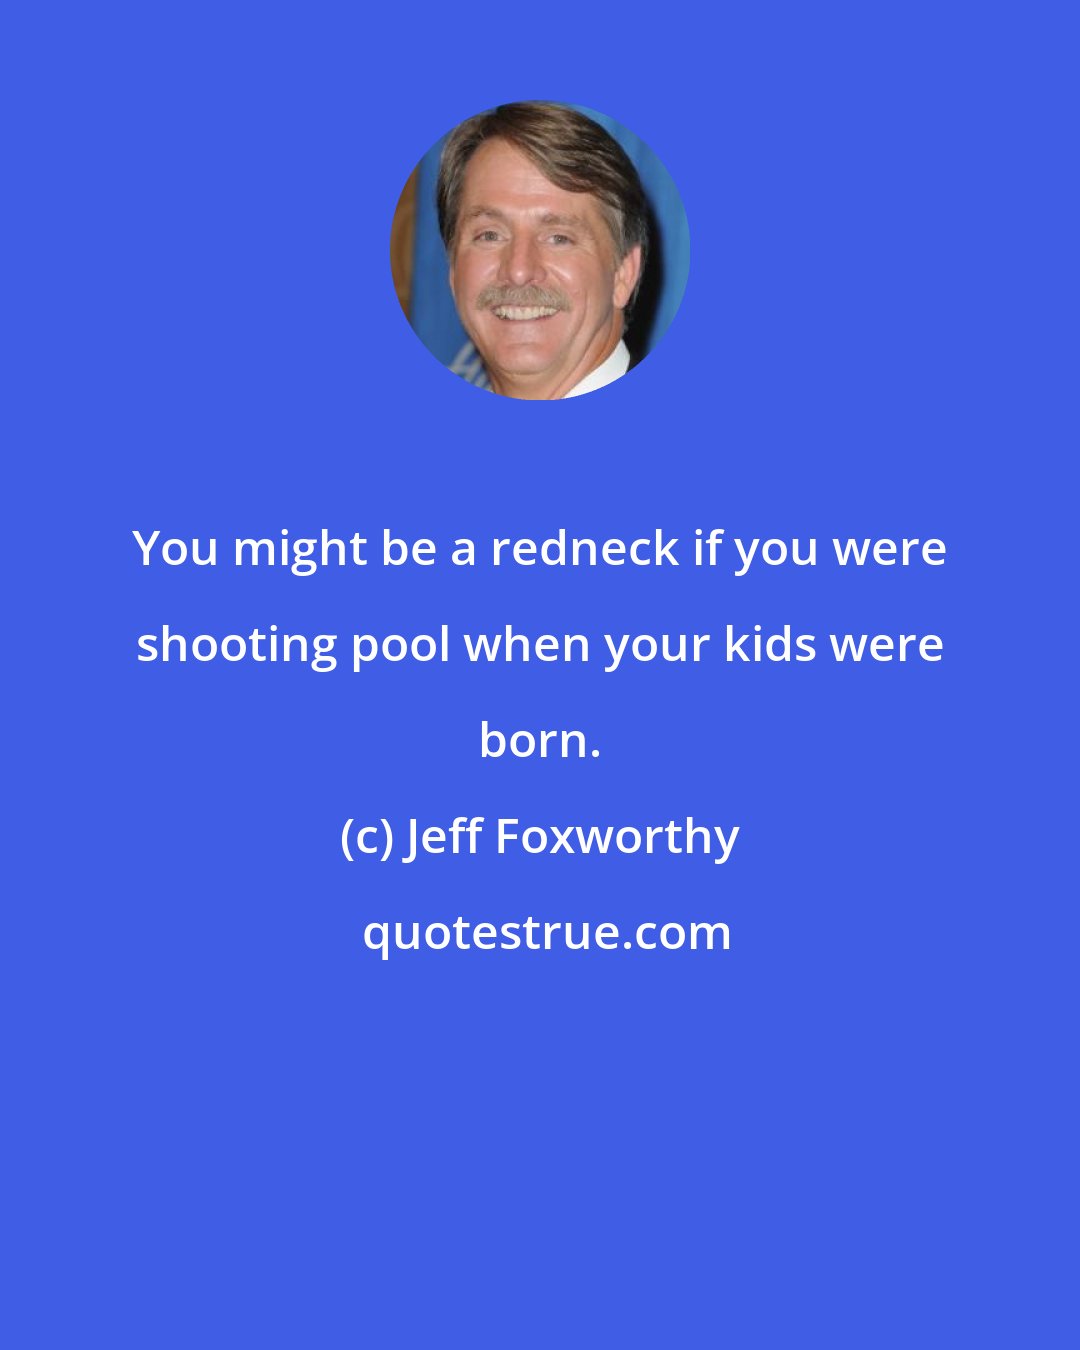 Jeff Foxworthy: You might be a redneck if you were shooting pool when your kids were born.